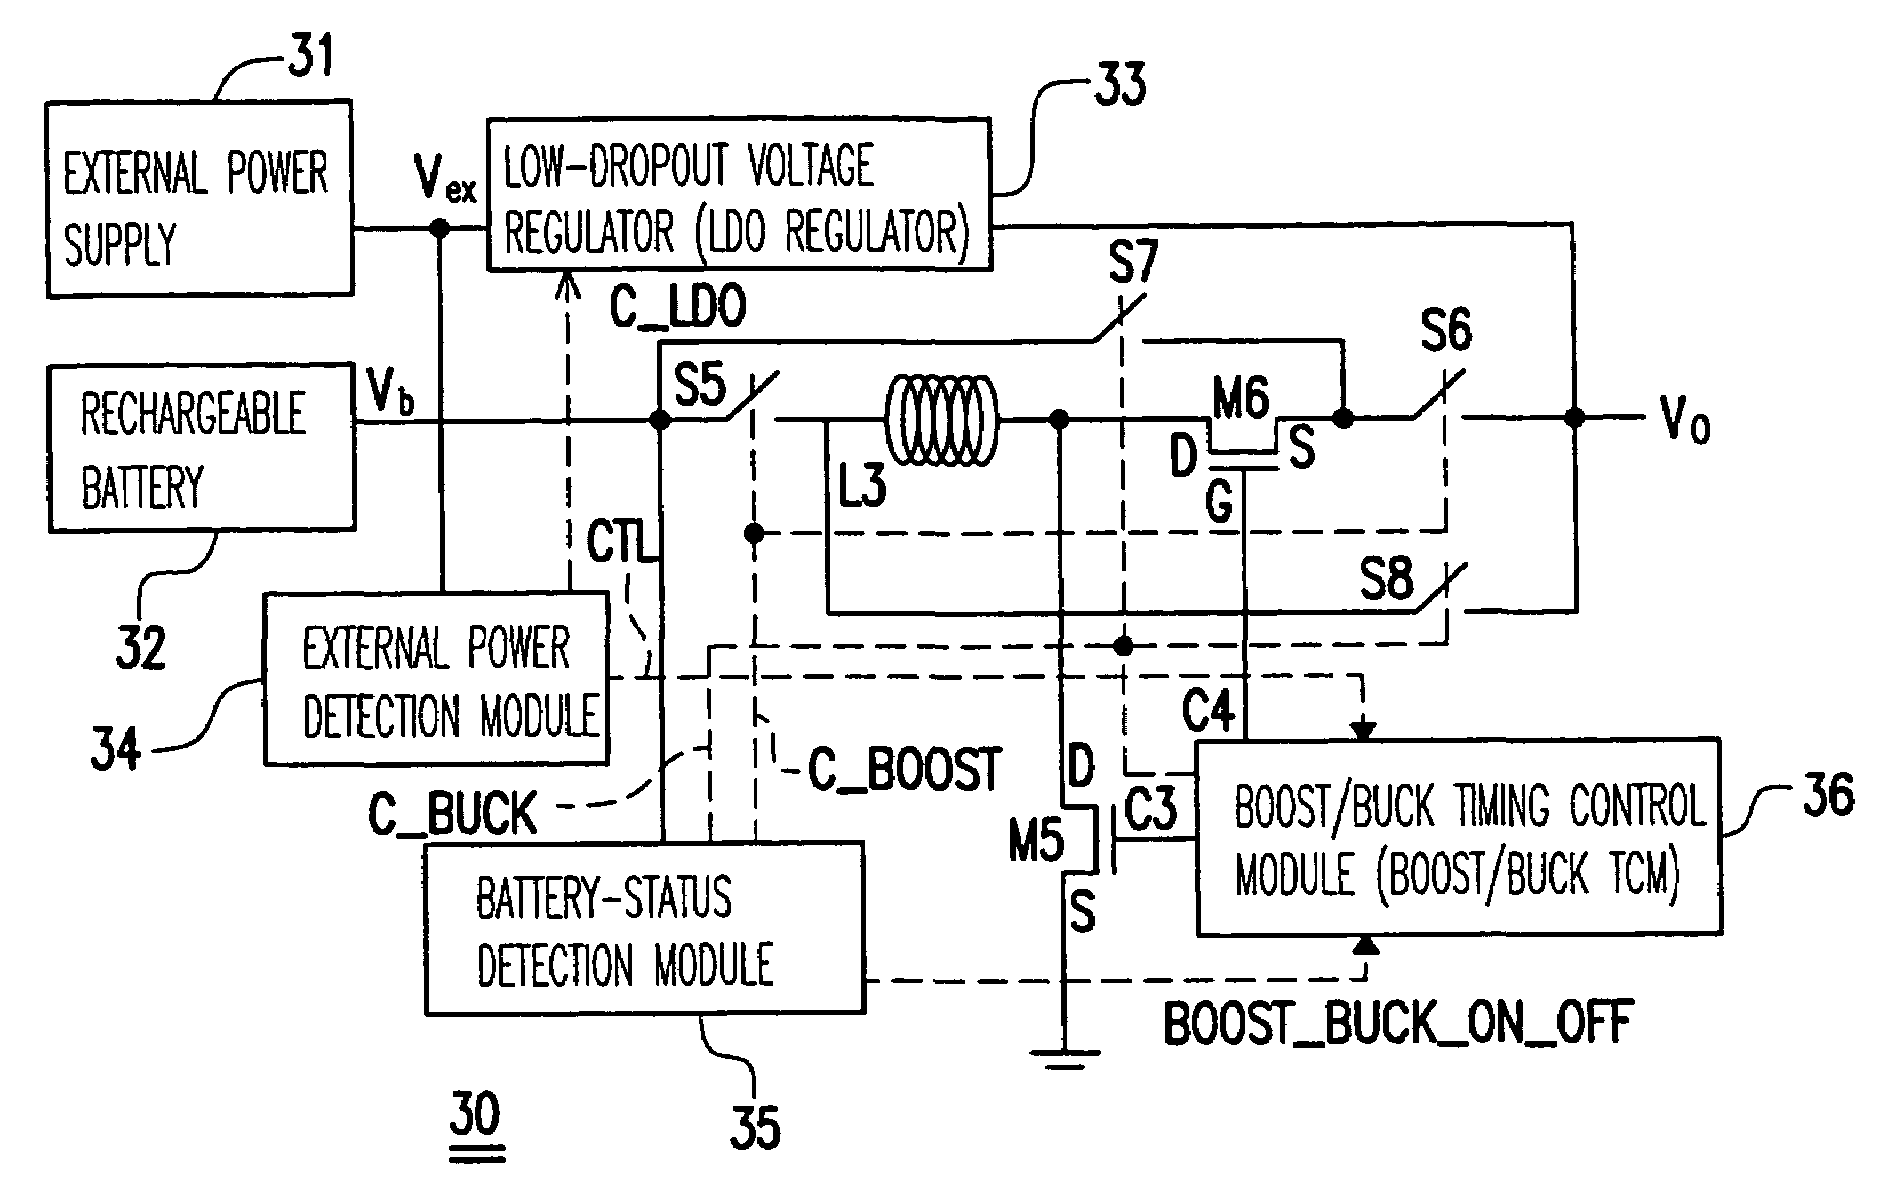 Buck/boost power converter for an electronic apparatus, method thereof and system incorporating the same